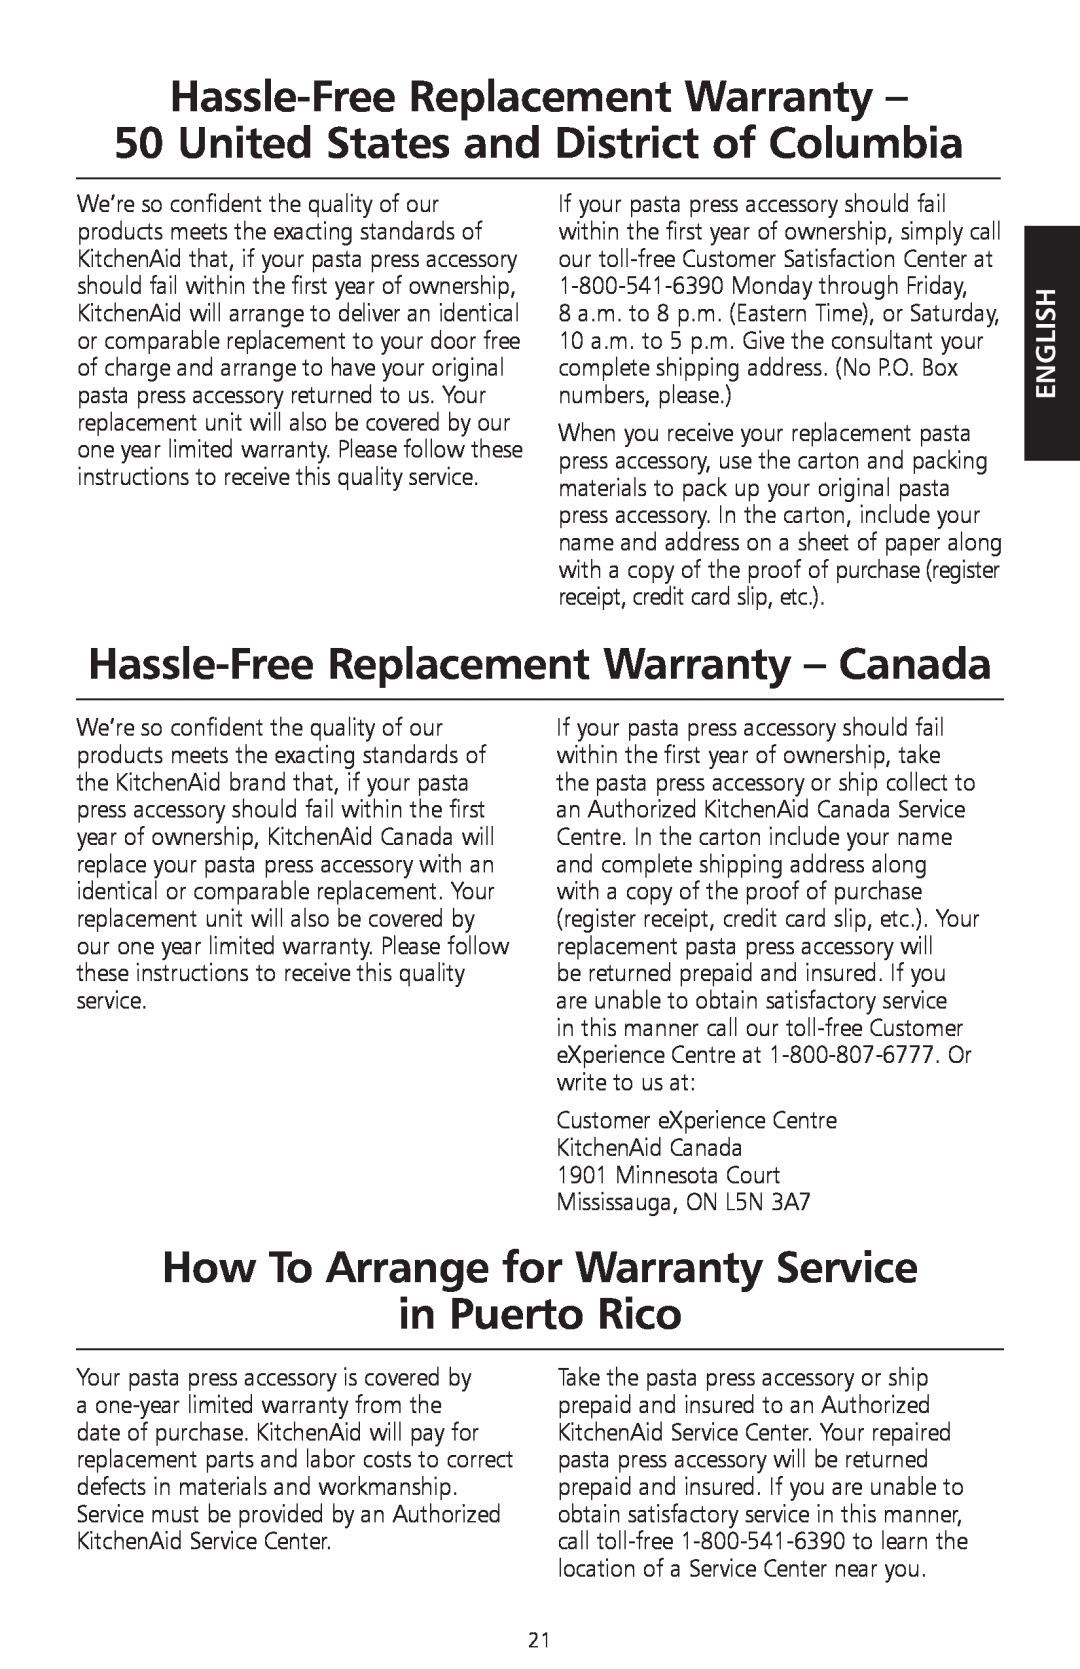 KitchenAid W10236413B manual Hassle-Free Replacement Warranty, United States and District of Columbia, English 